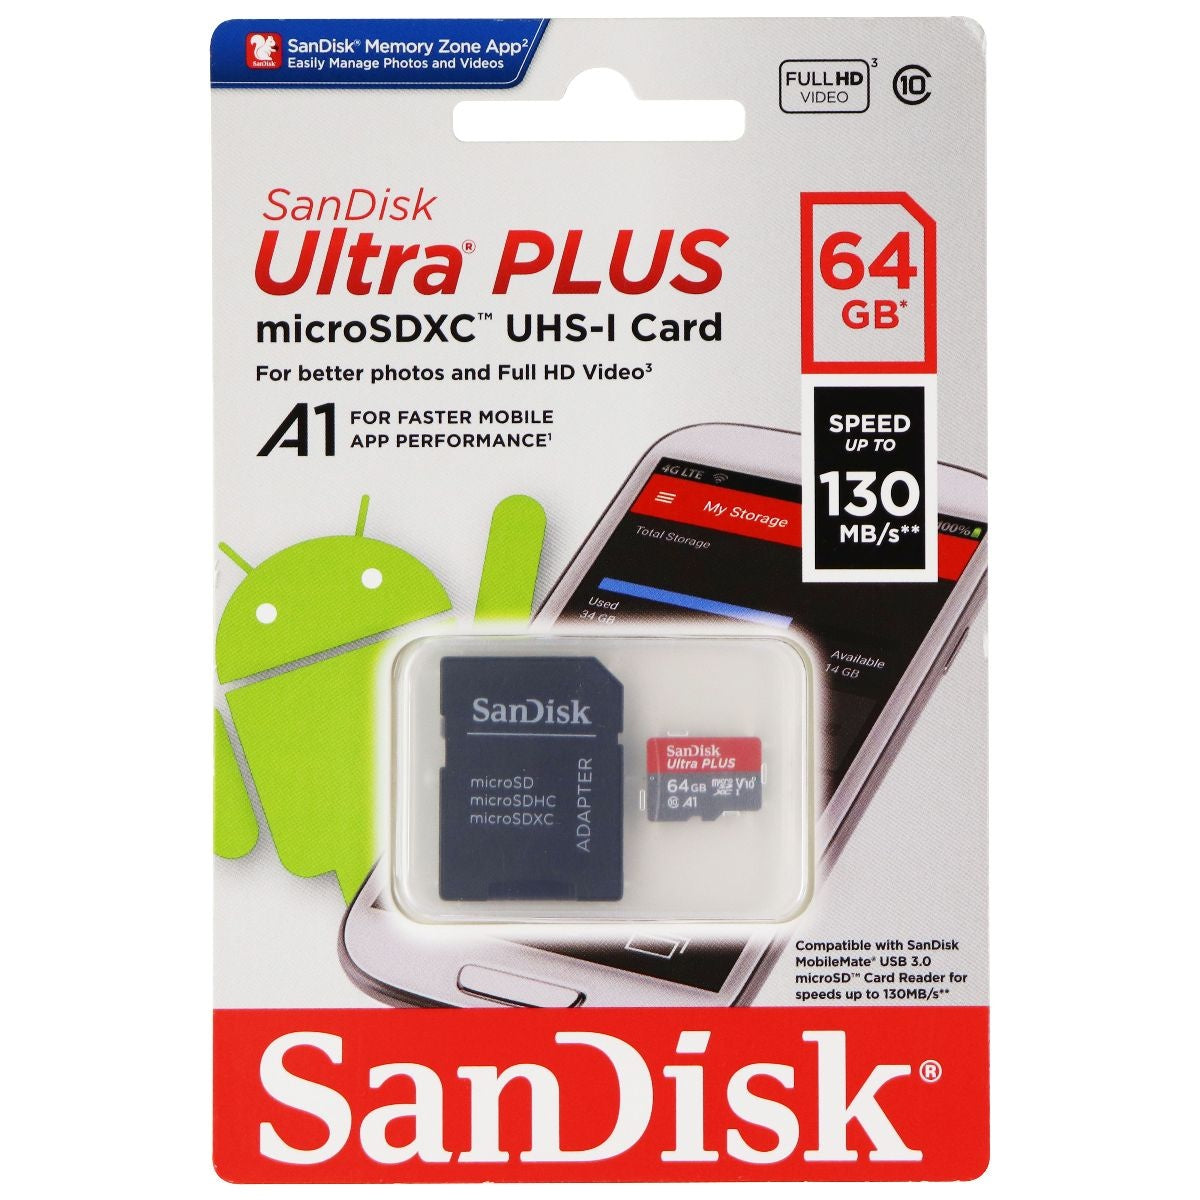 SanDisk Ultra MicroSDXC UHS Card with Adapter, 64GB